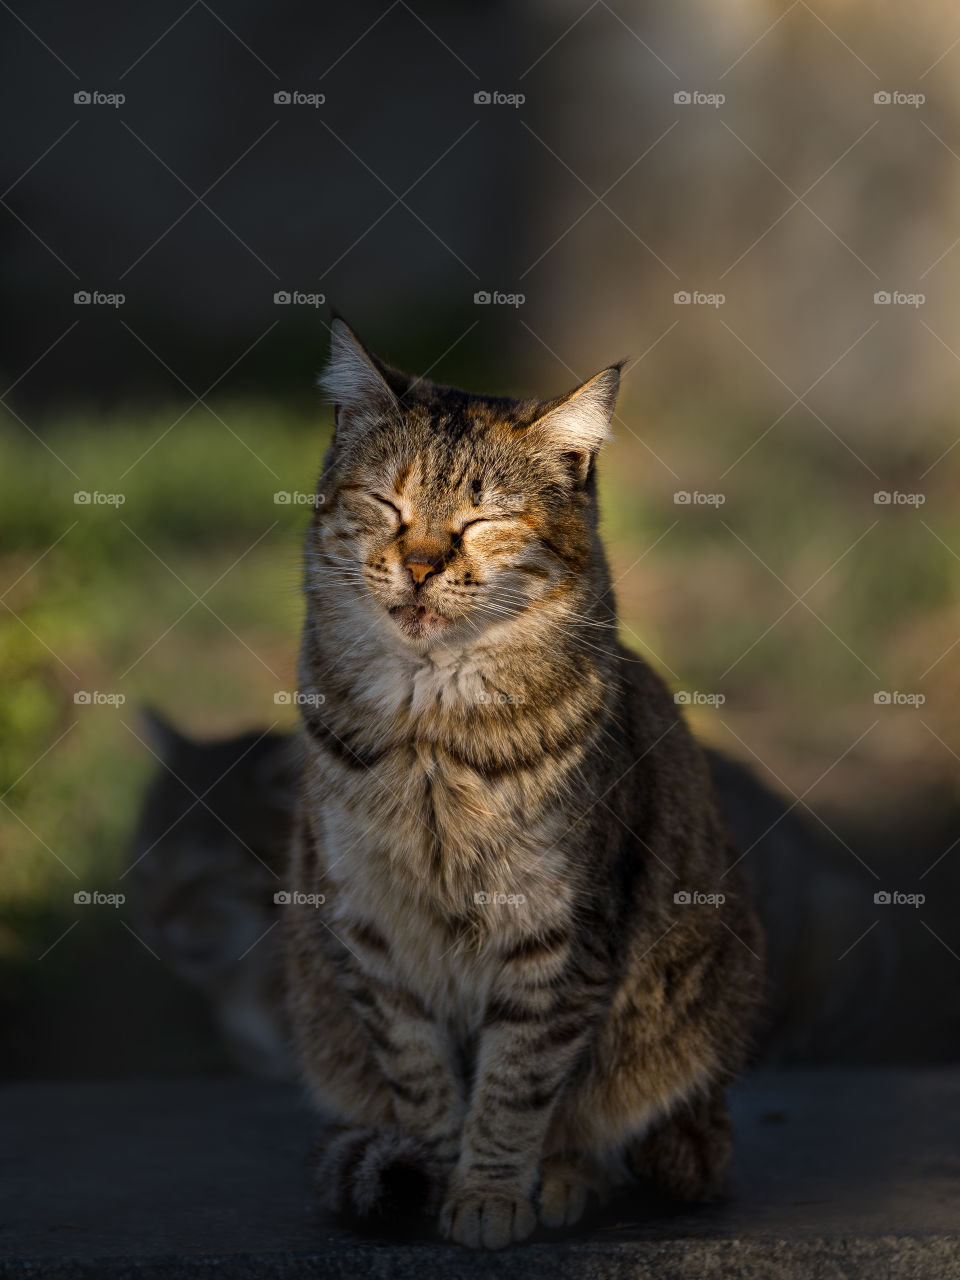 cat with closed eyes and a satisfied muzzle sits and basks under the warm rays of the sun